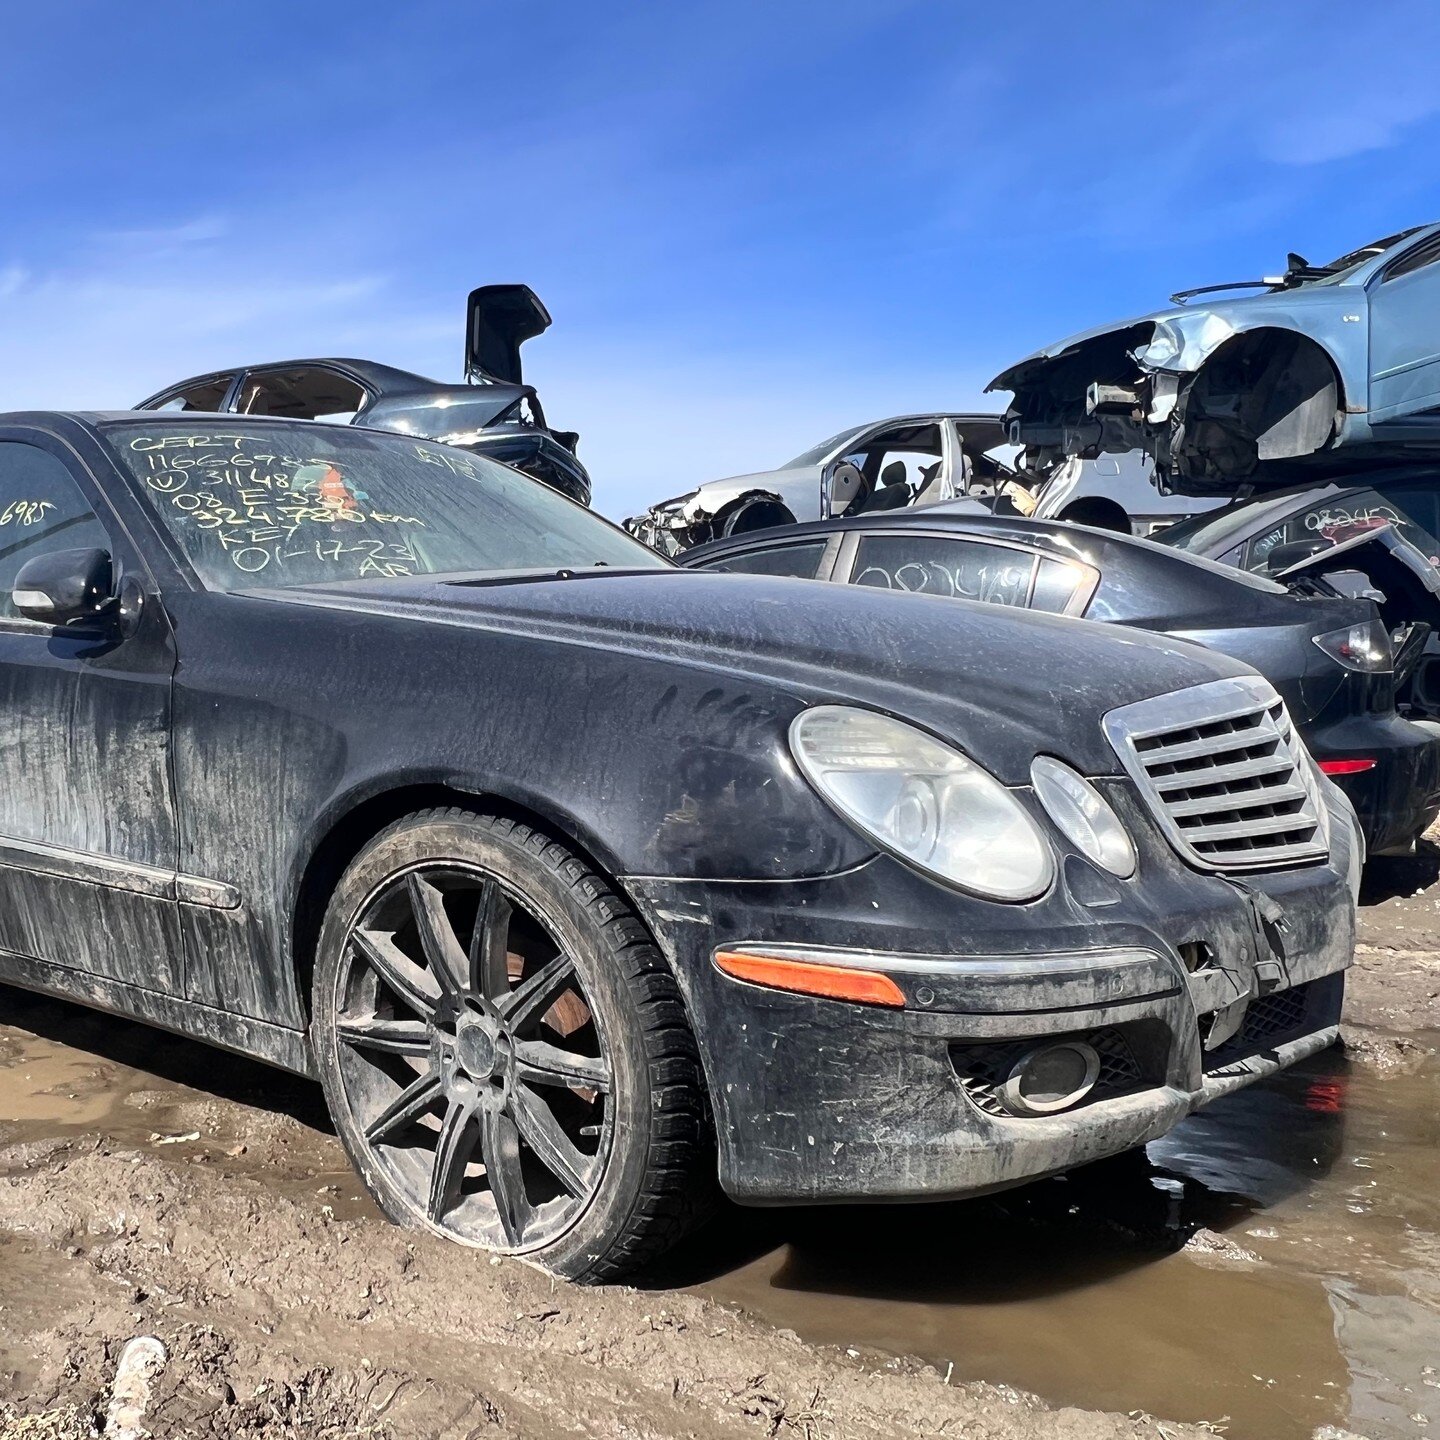 2008 MERCEDES BENZ E320 3.0T *FOR PARTS* - RWD, 7 SPEED AUTOMATIC TRANSMISSION, 6 CYCLINDER , BLACK, KMS:201809, VIN:WDBUF22X18B311487
 
We offer contactless delivery and are more than willing to accommodate your needs.
Why pick your part when we pul